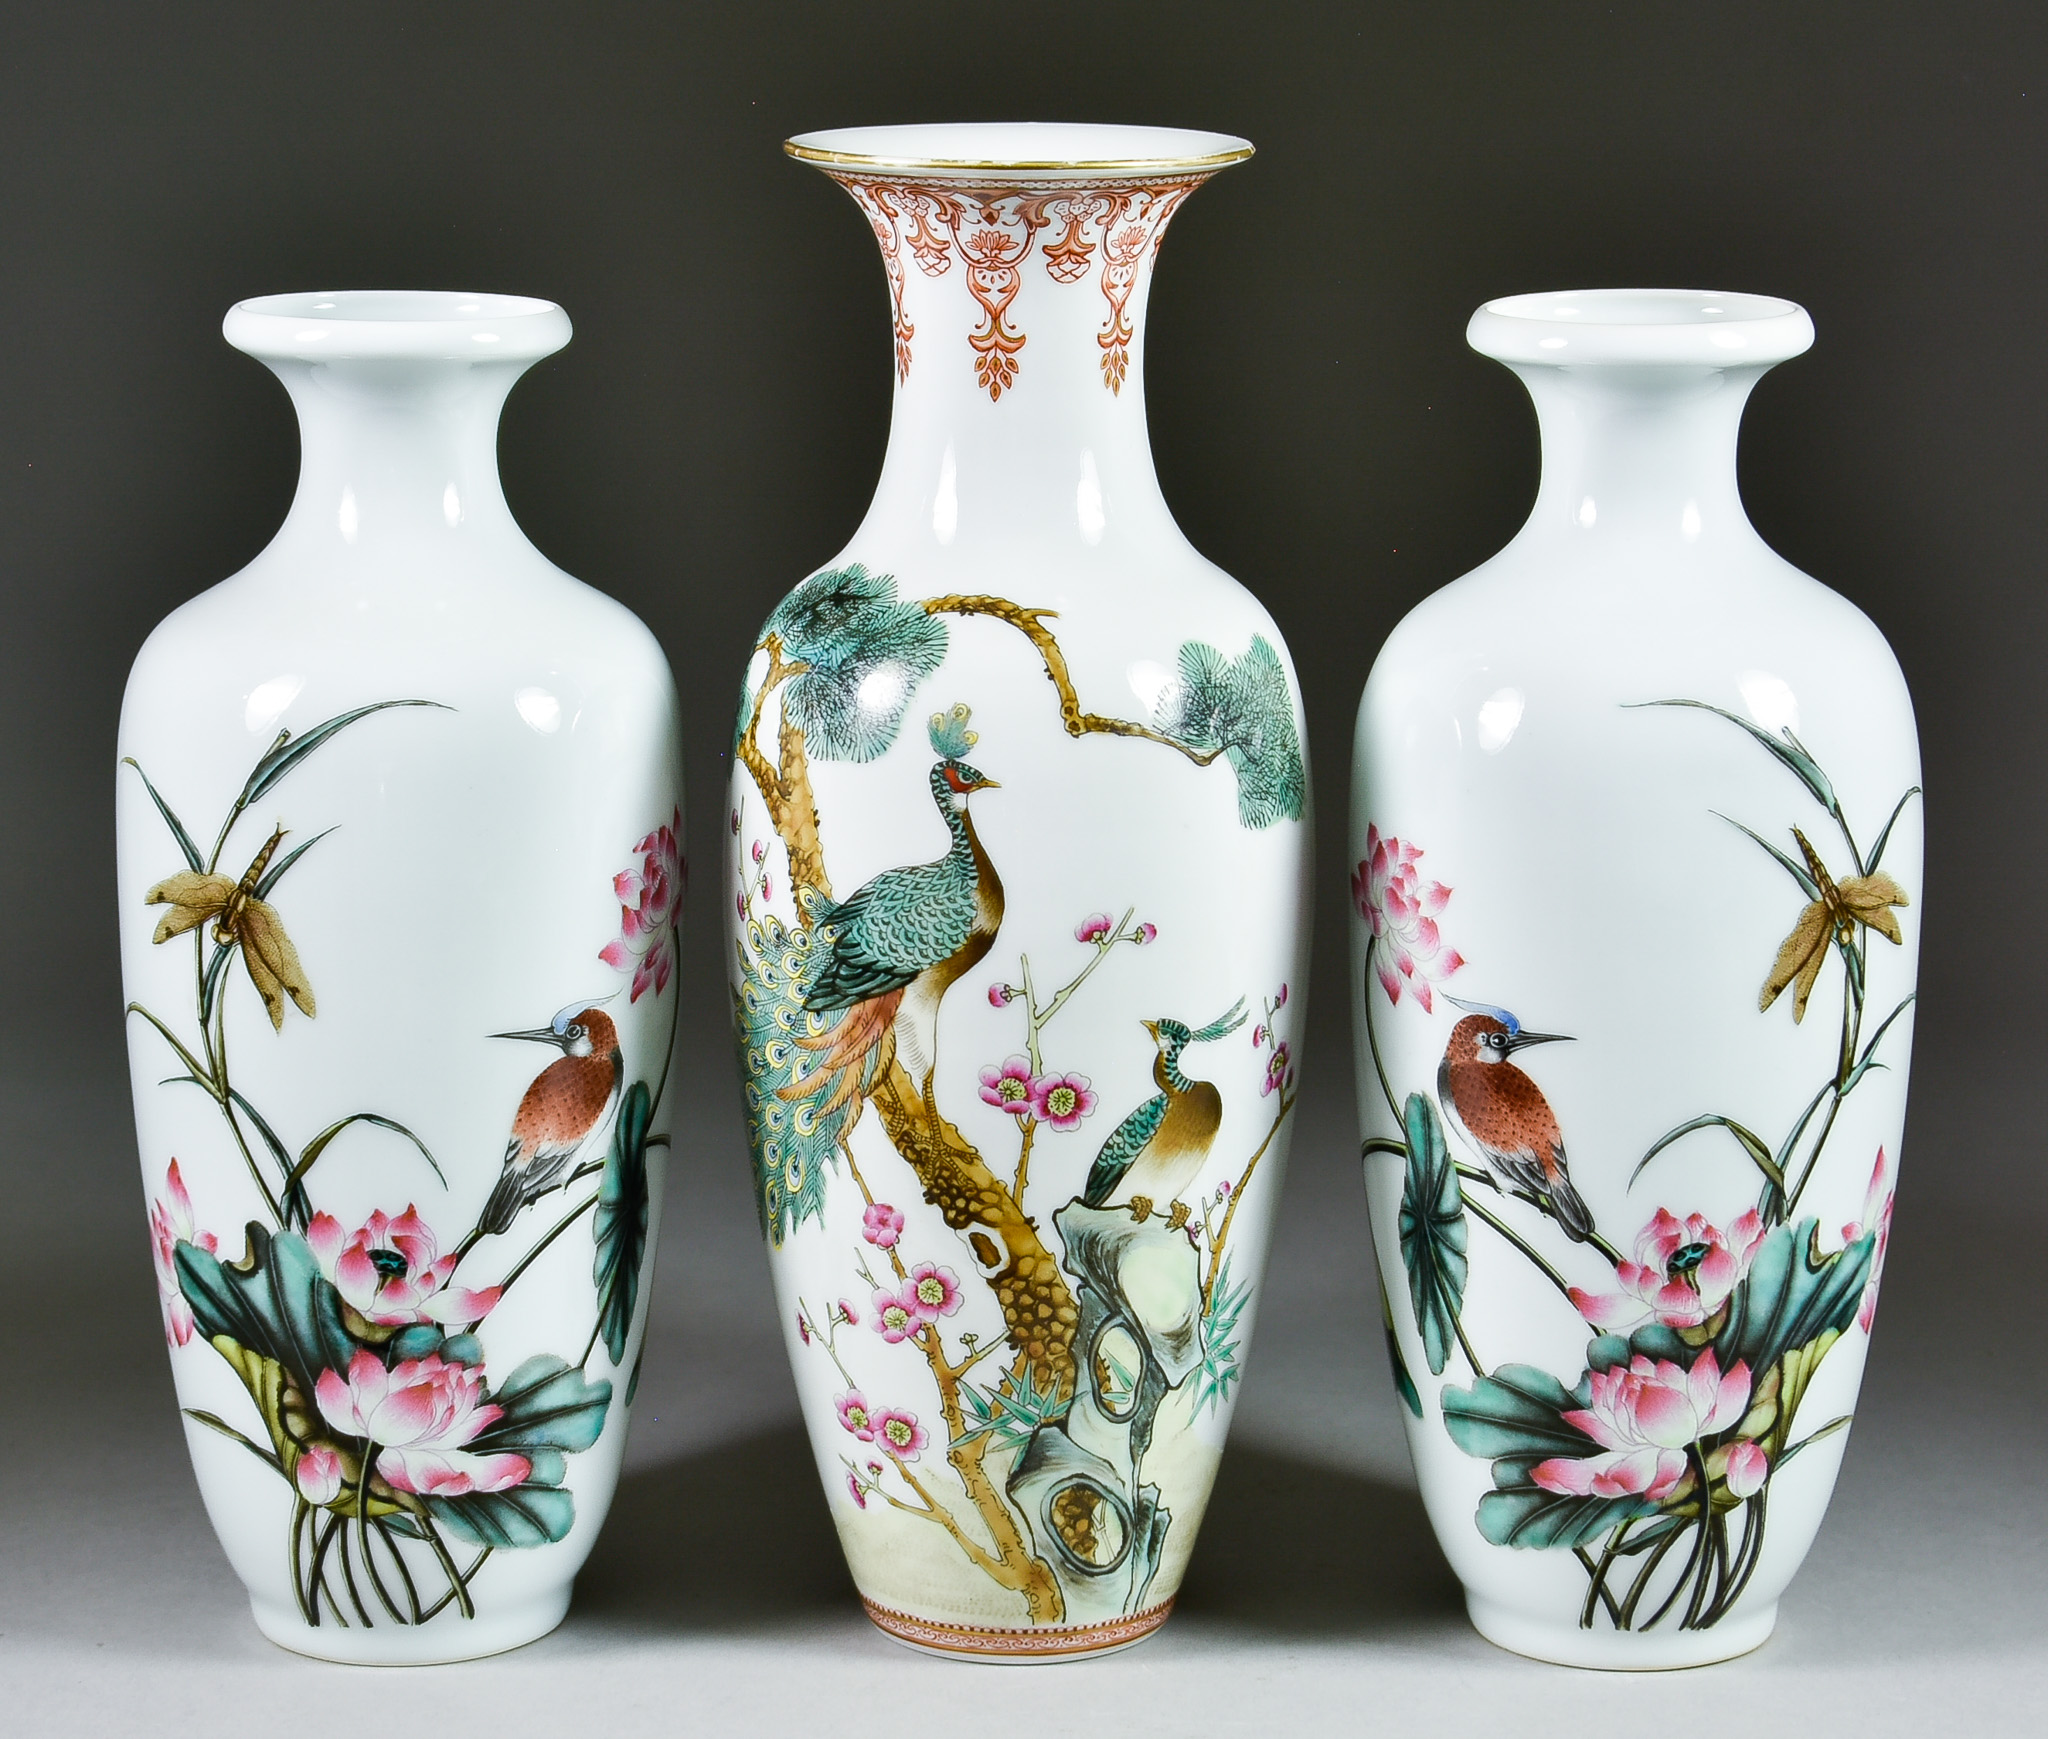 A Chinese Famille Rose Porcelain Vase and a Pair of Vases, 20th Century, the vase of slender